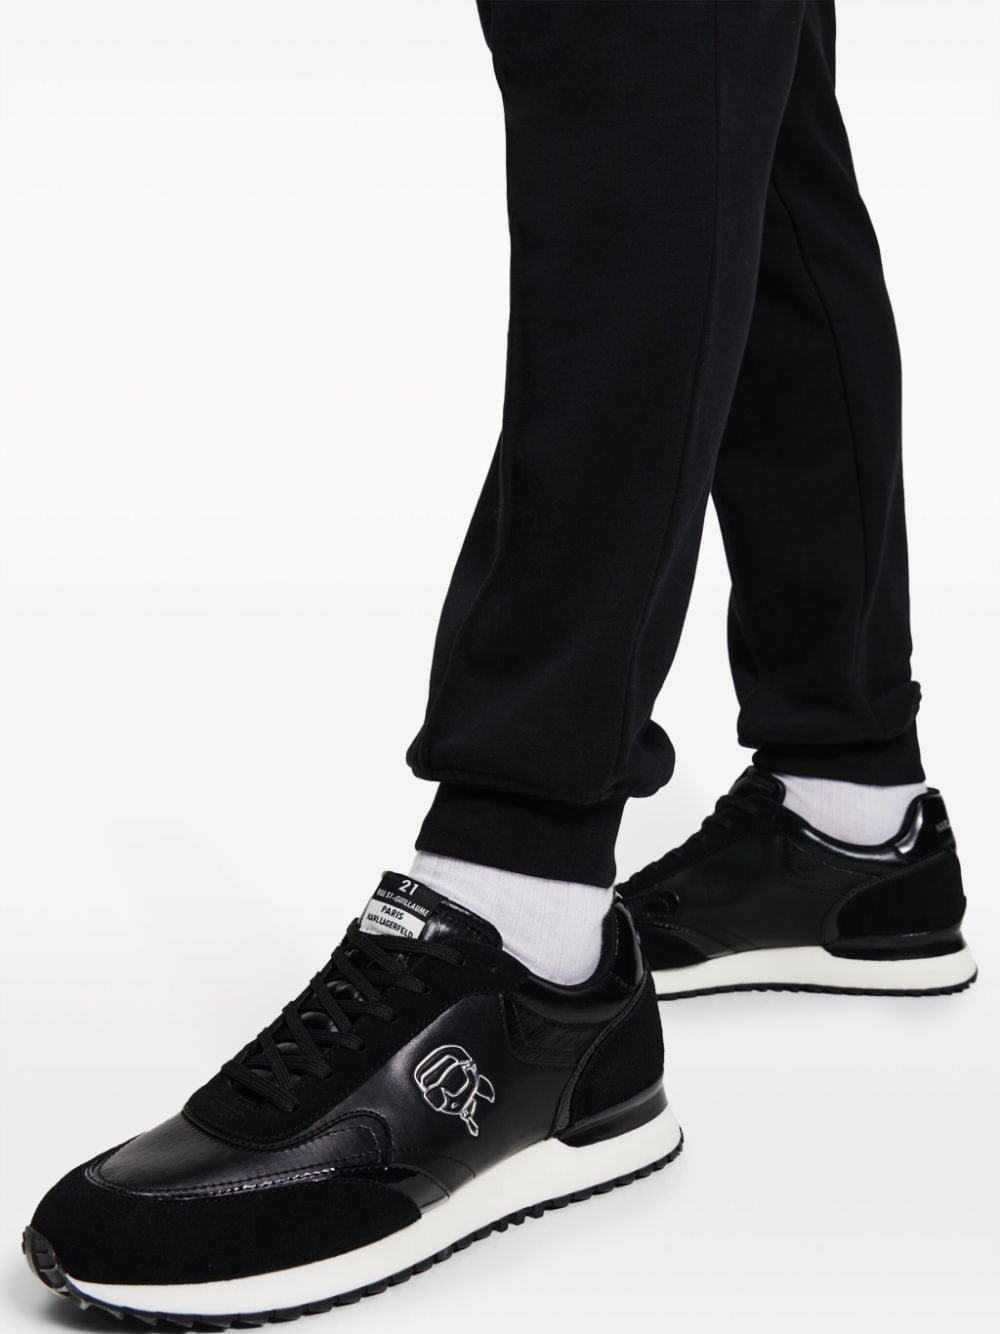 Karl Lagerfeld Velocitor lace-up sneakers Black